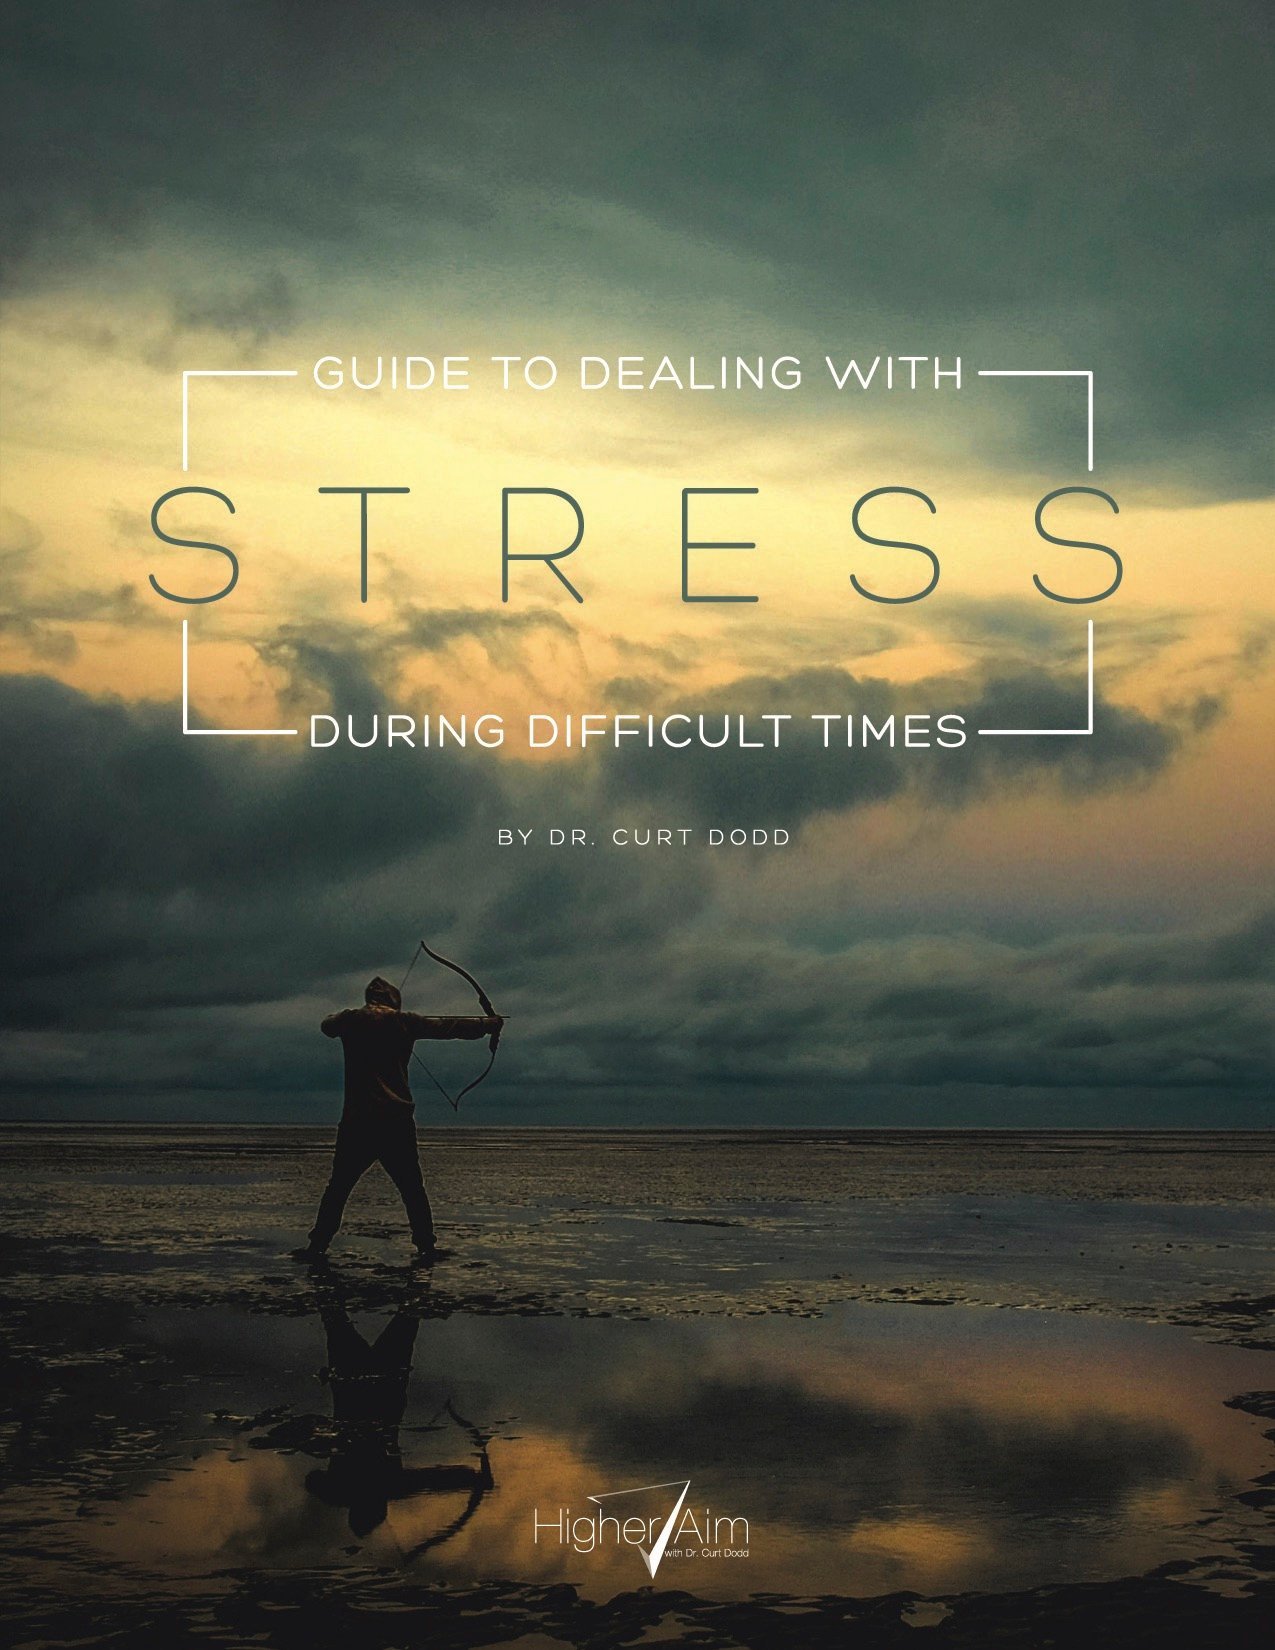 Guide To Dealing With Stress During Difficult Times